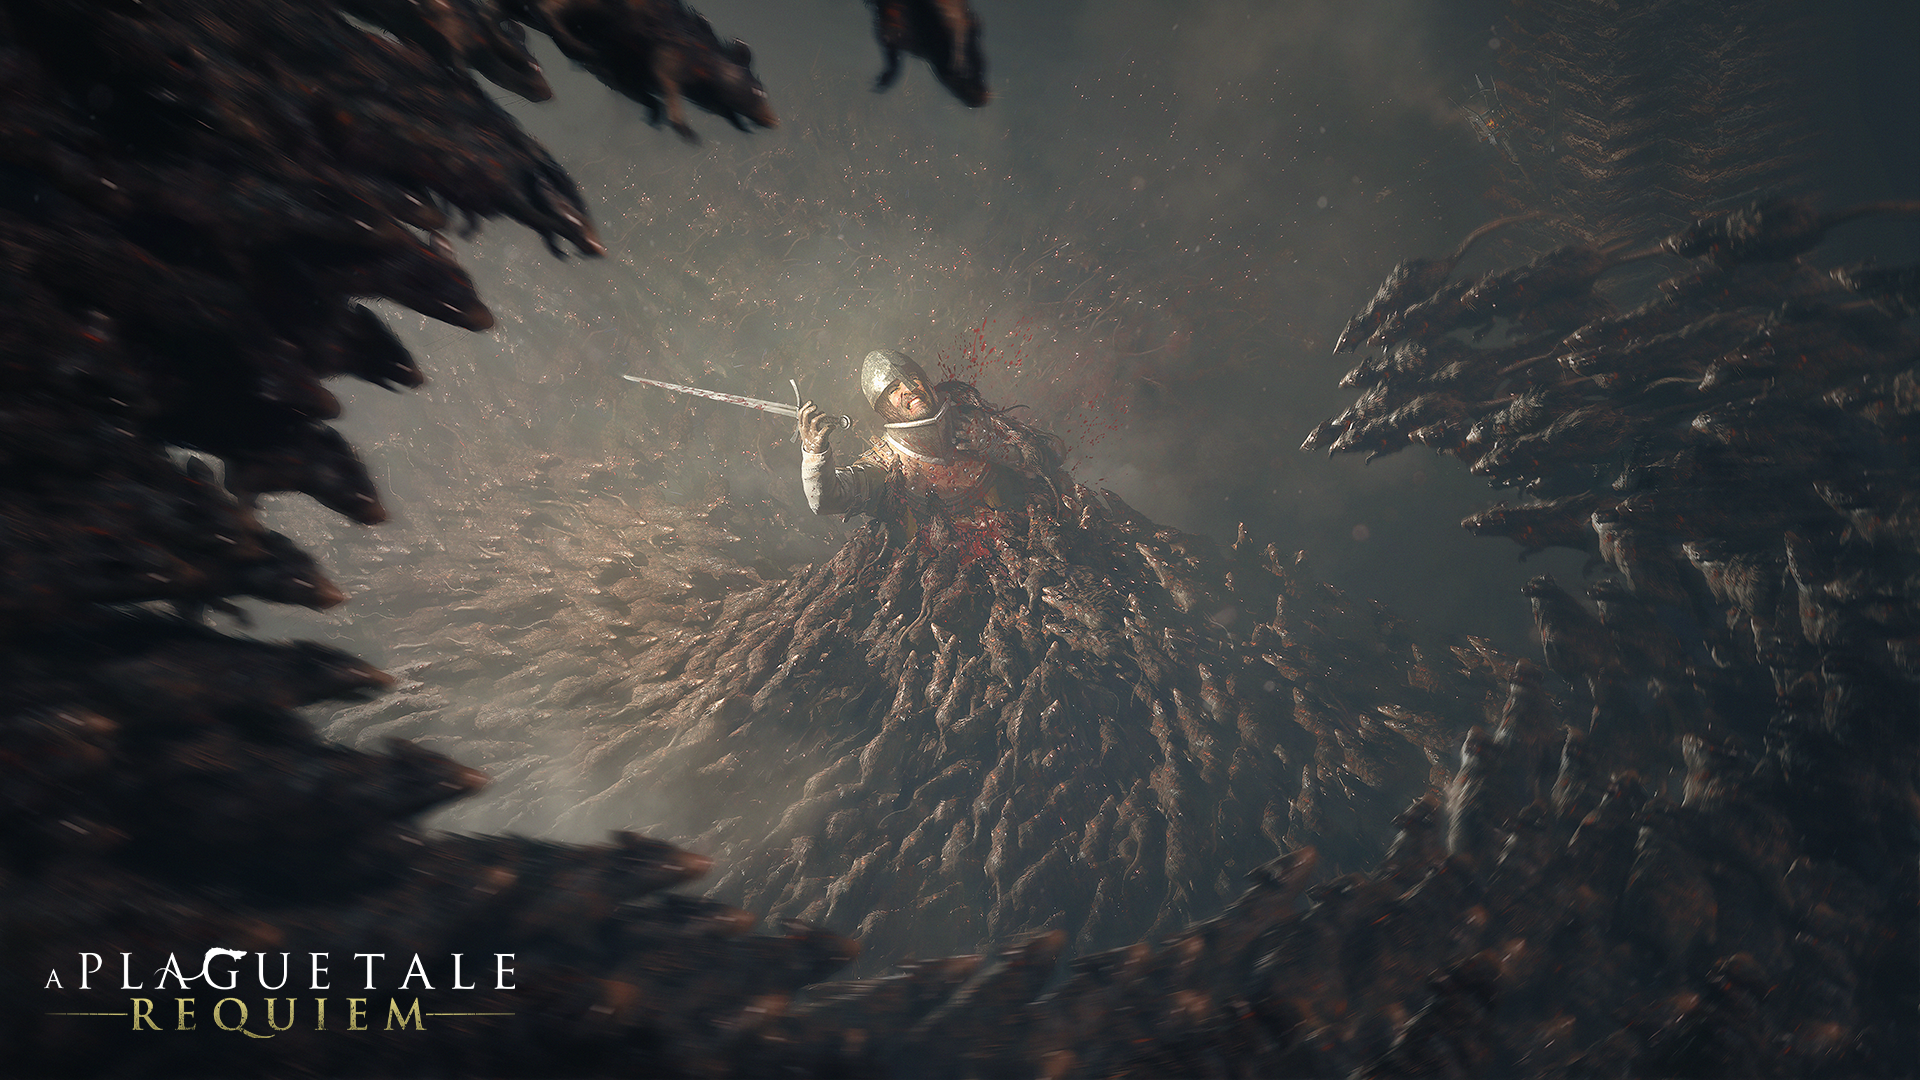 A Plague Tale: Requiem Shouldn't Drop the Ball With Its DLC Like Innocence